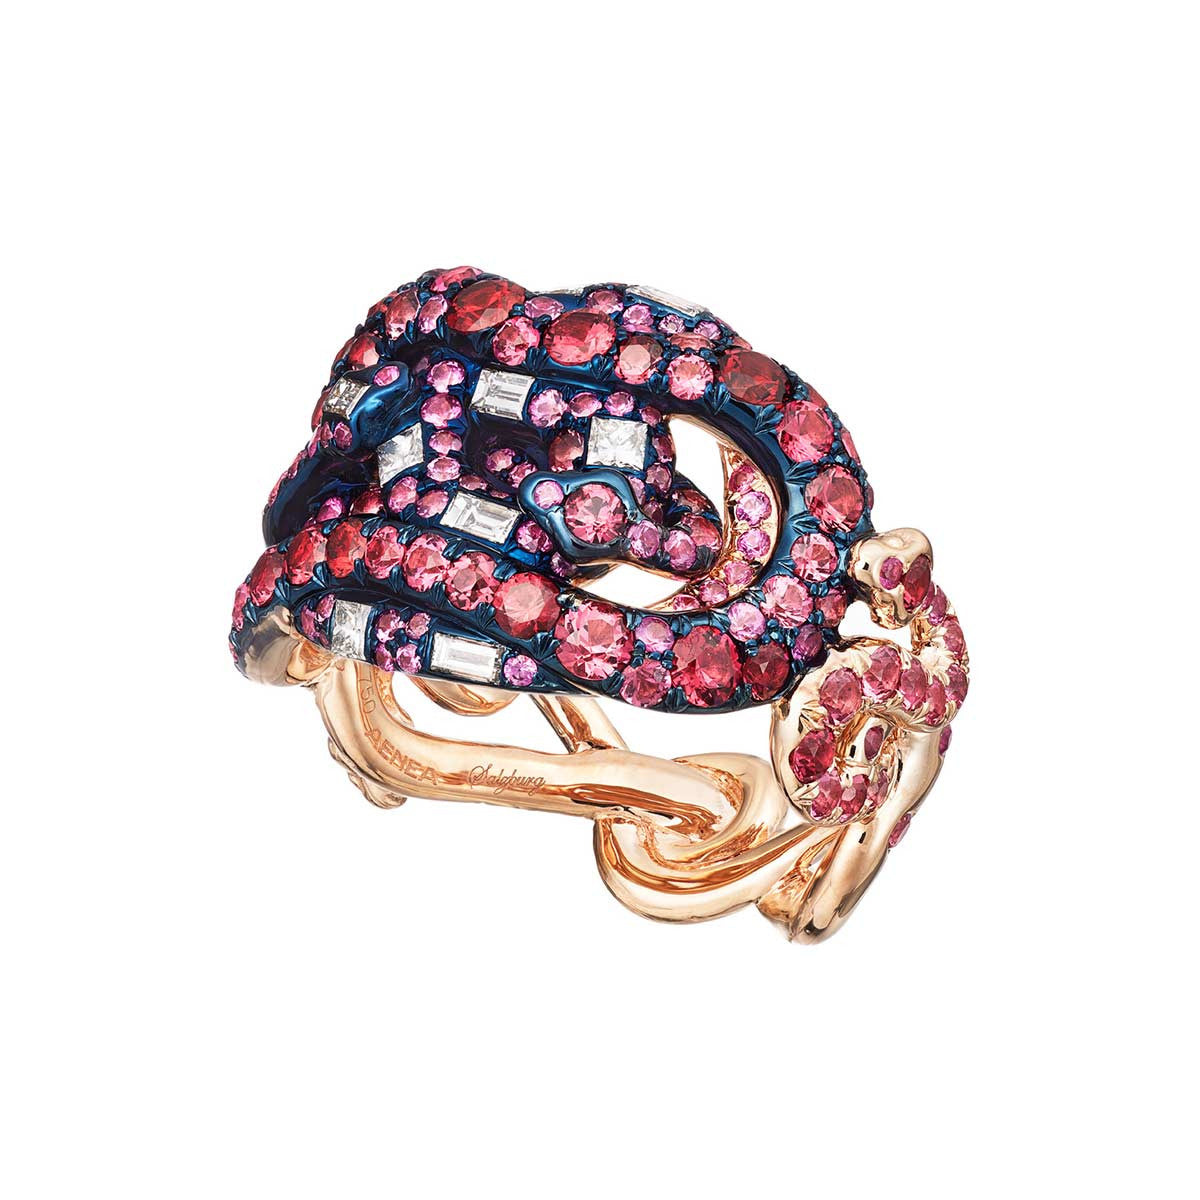 Ring "4 Snakes" Pink Gold with Red Spinels, Pink Sapphires and White Diamonds